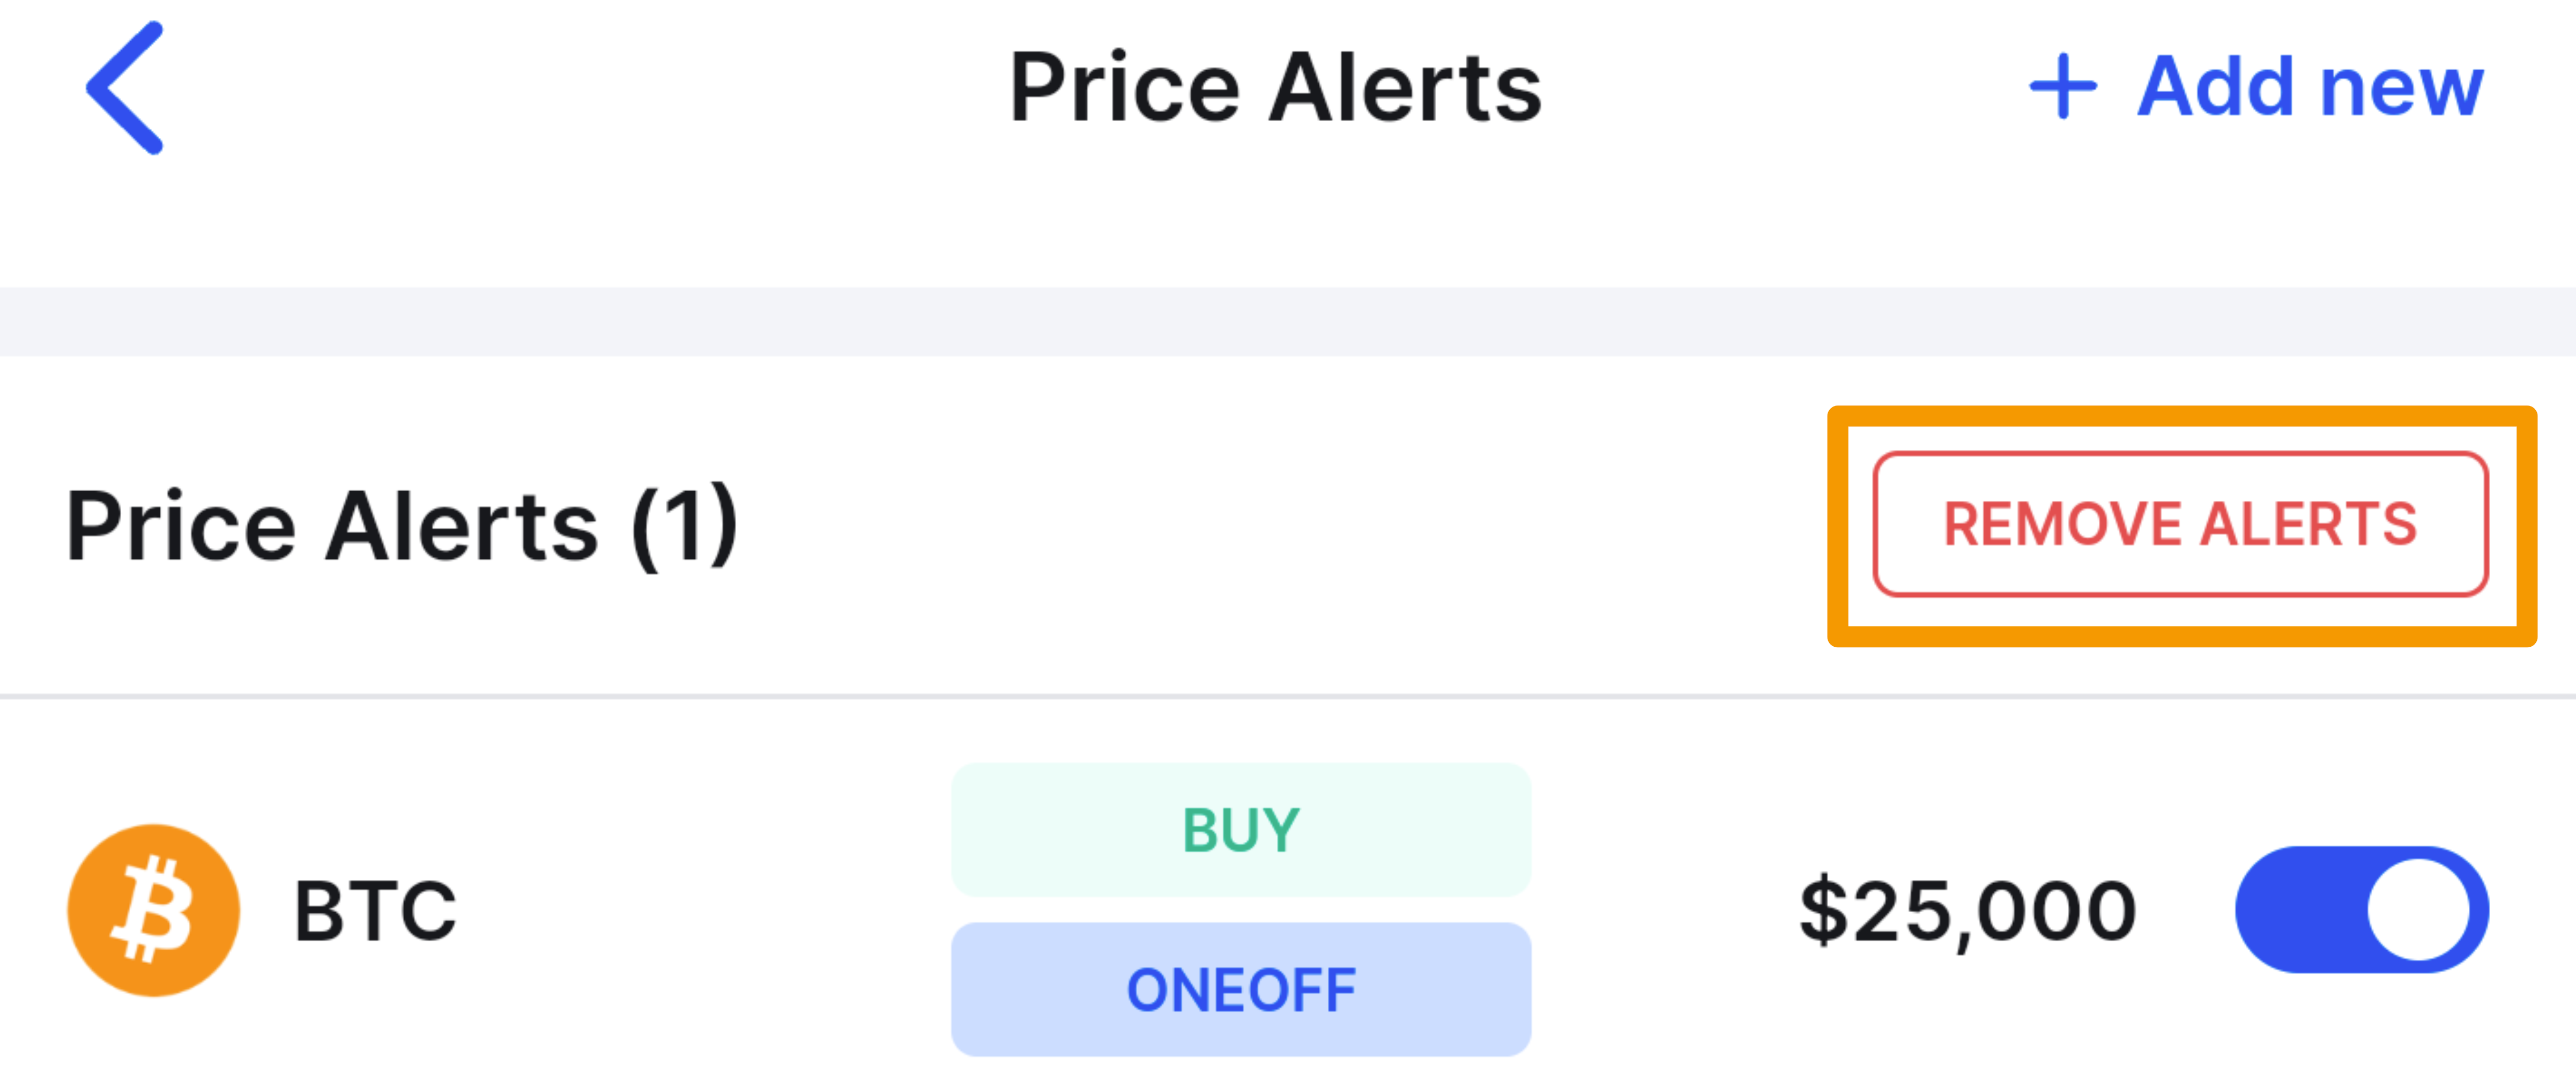 CoinSpot_Mobile_App_-_Price_Alert_Remove.png